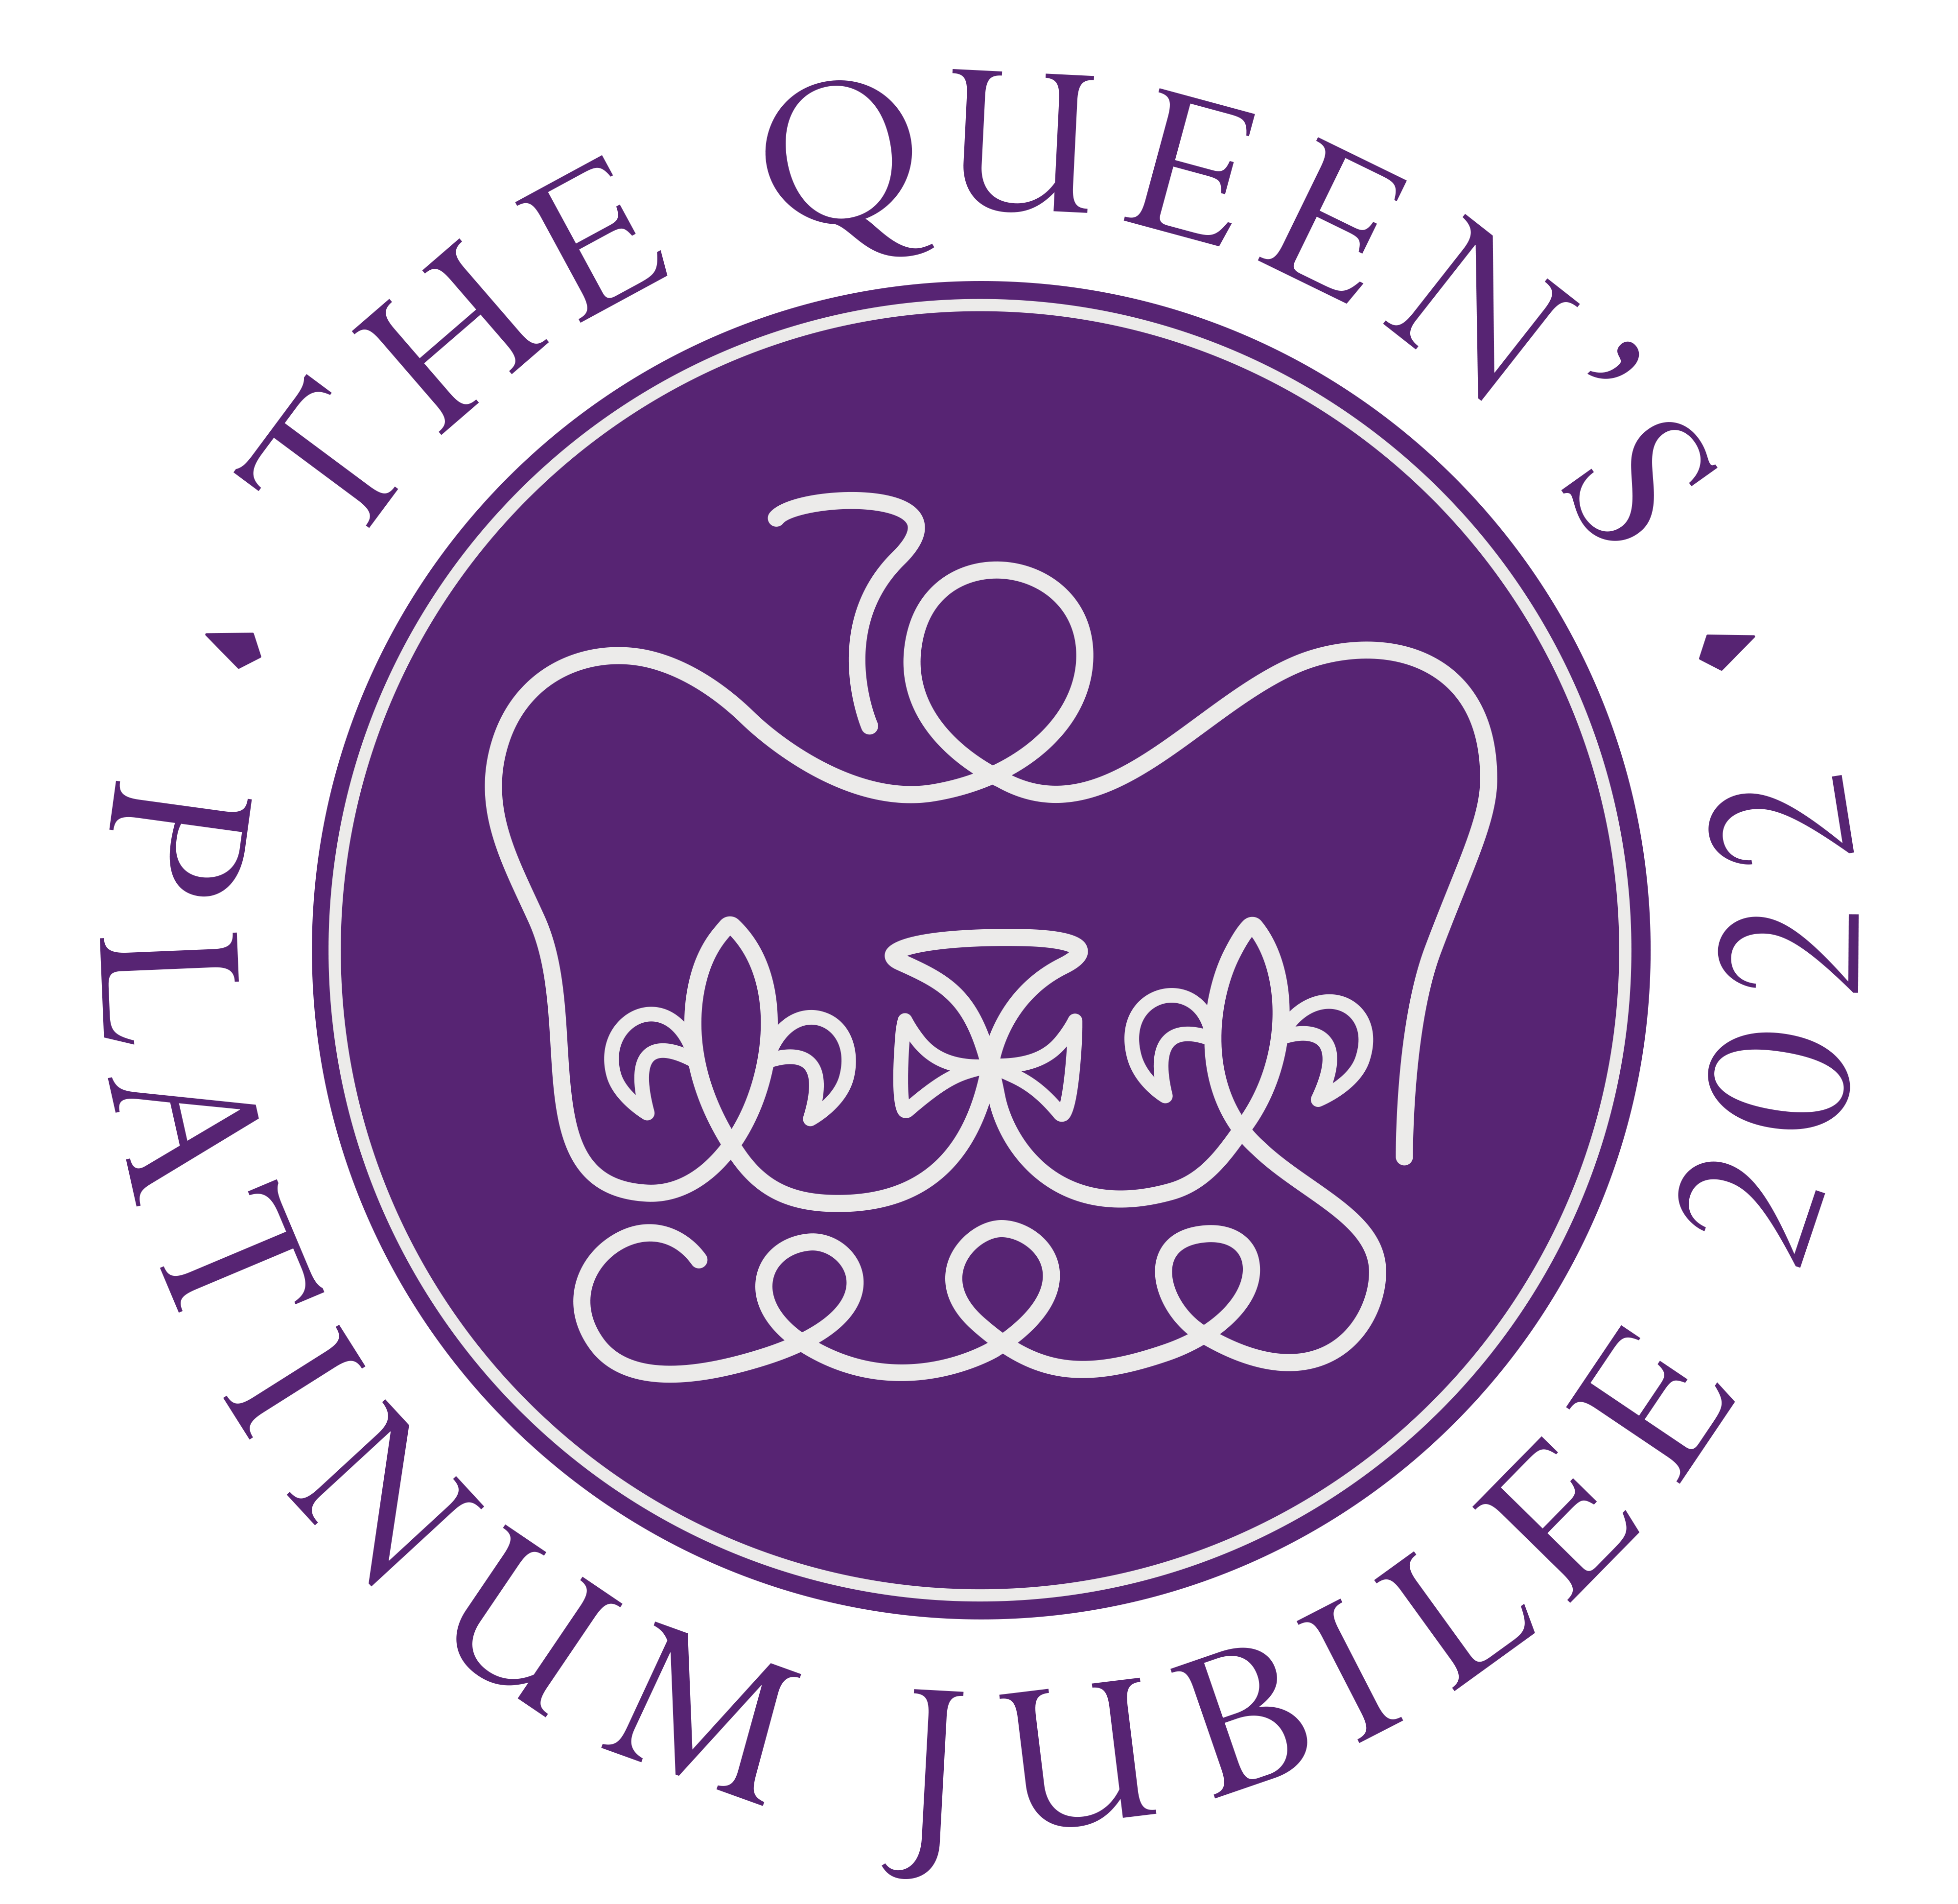 double sided design platinum jubilee decorations 2022 Illustrated hand drawn keepsake Queens jubilee Mug Queens jubilee gifts 